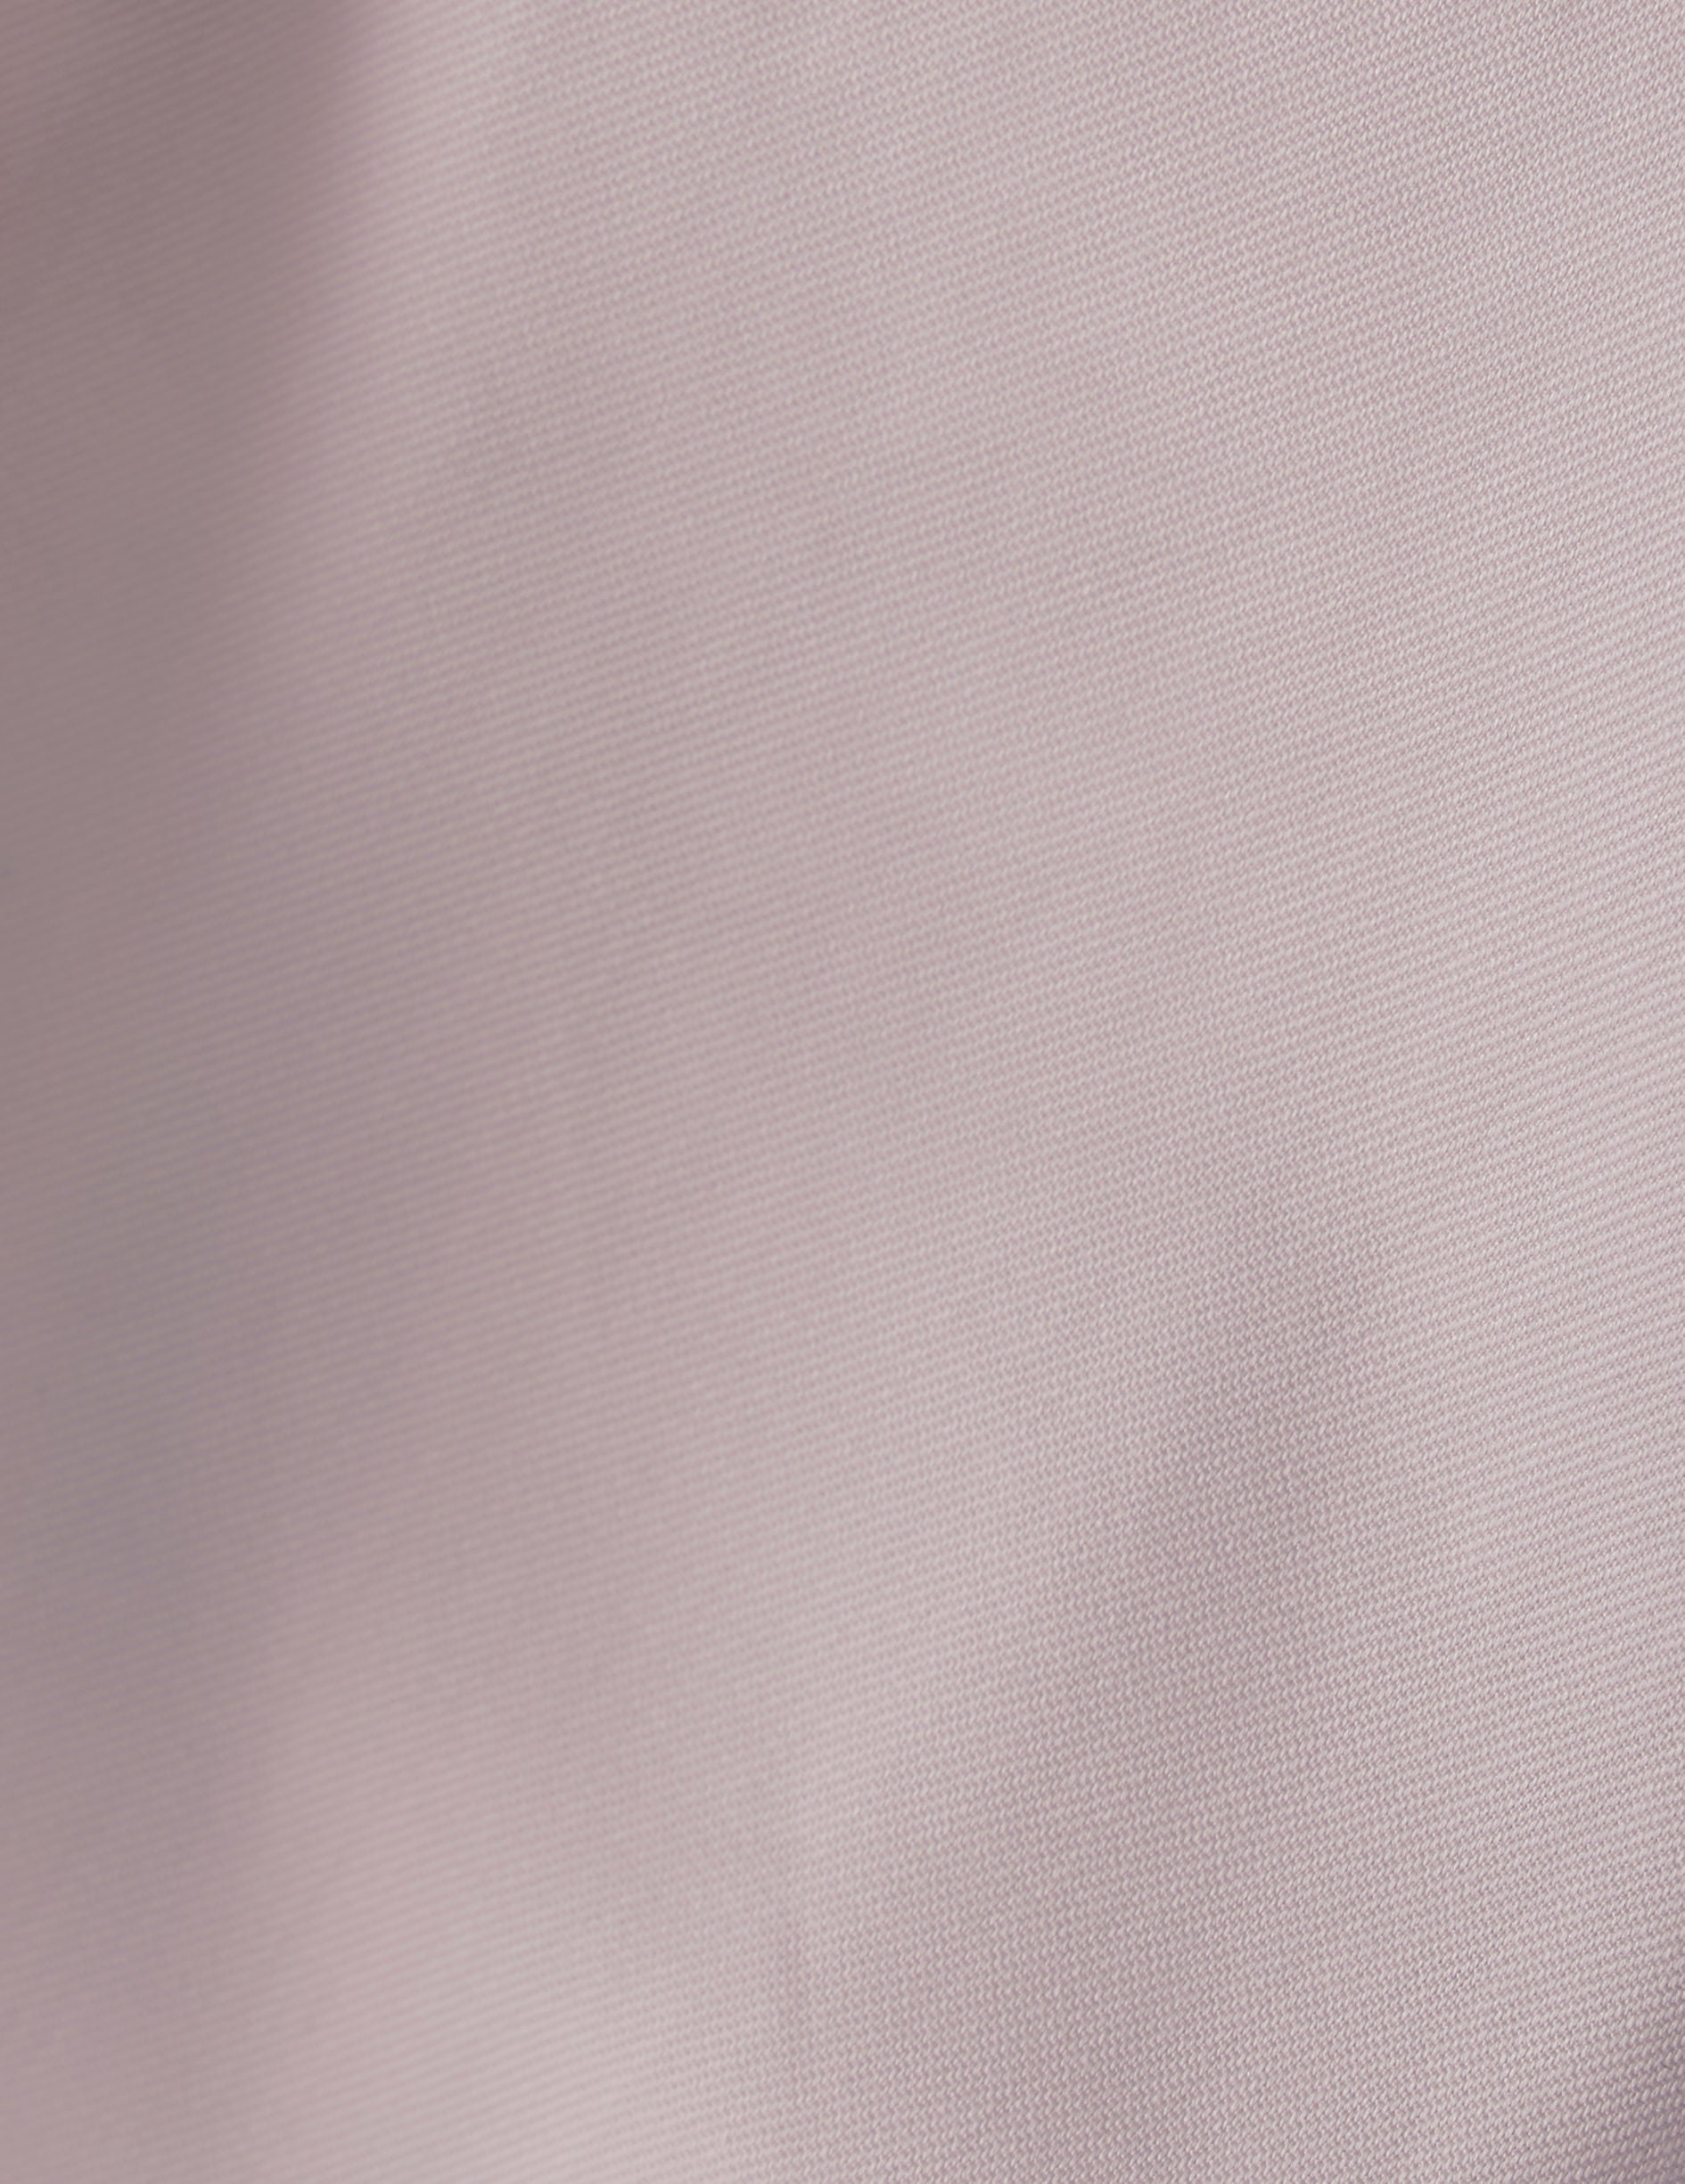 Pink fitted shirt - Twill - Italian Collar